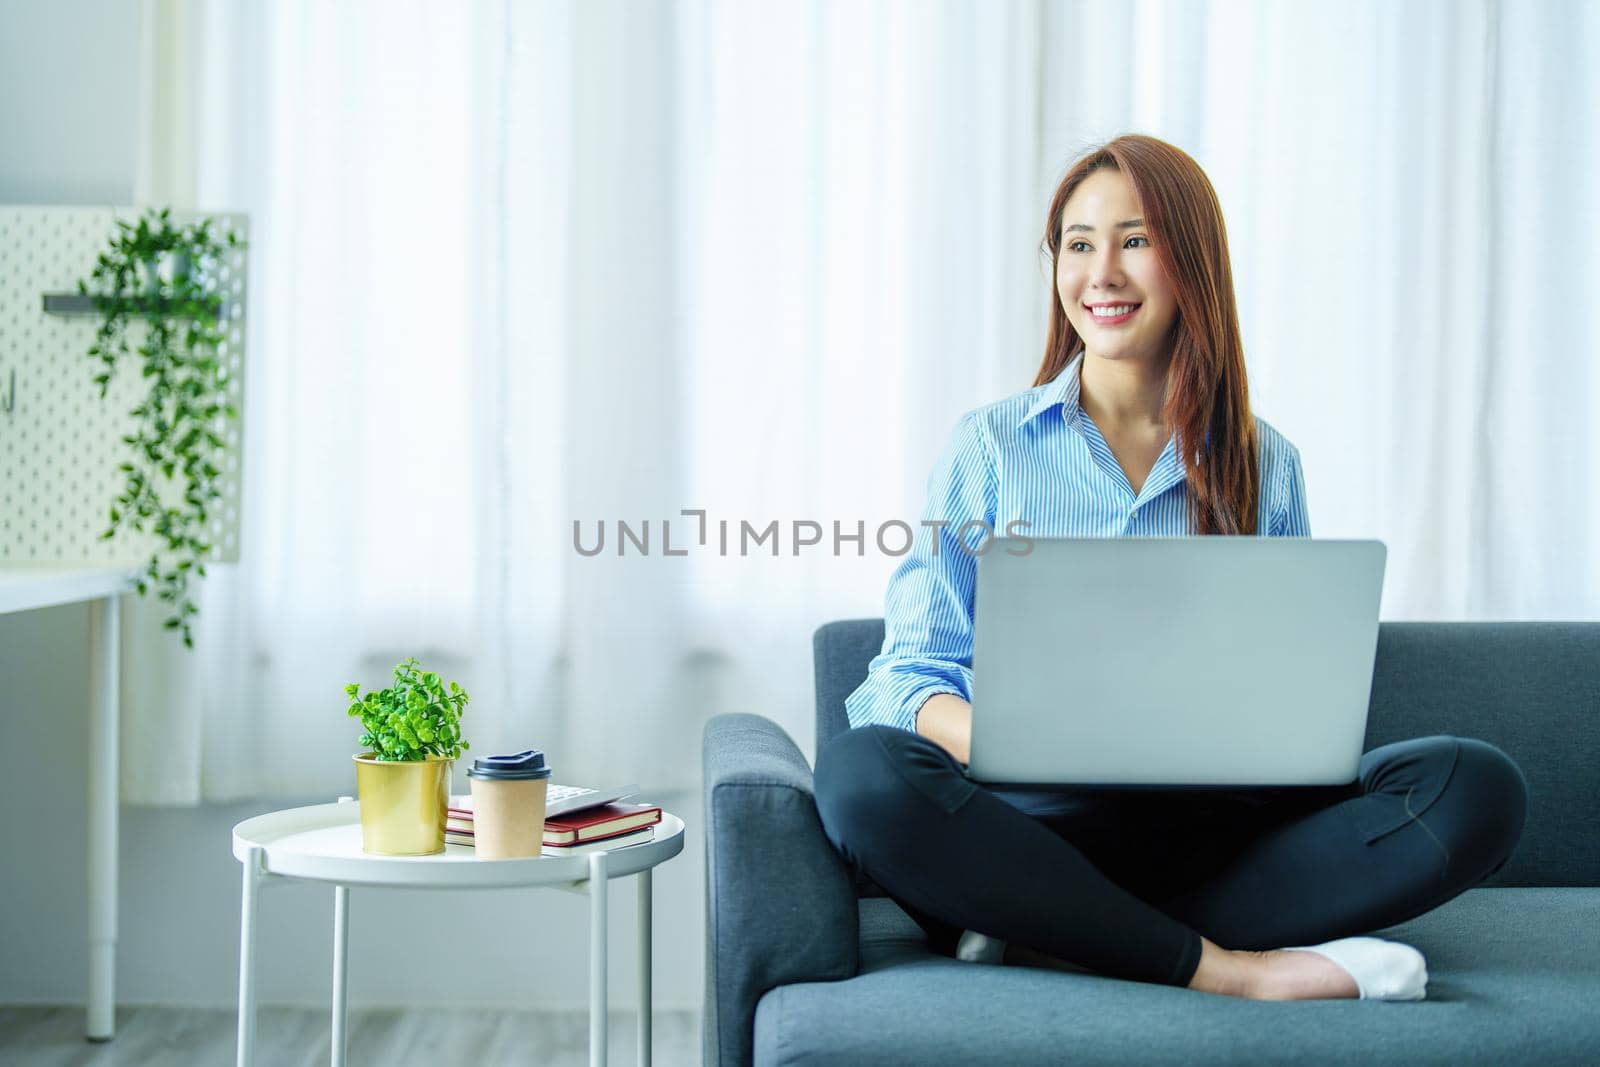 internet learning, online shopping, selling, meeting, information searching, Portrait of young Asian woman showing smiling face while using tablet to work at home